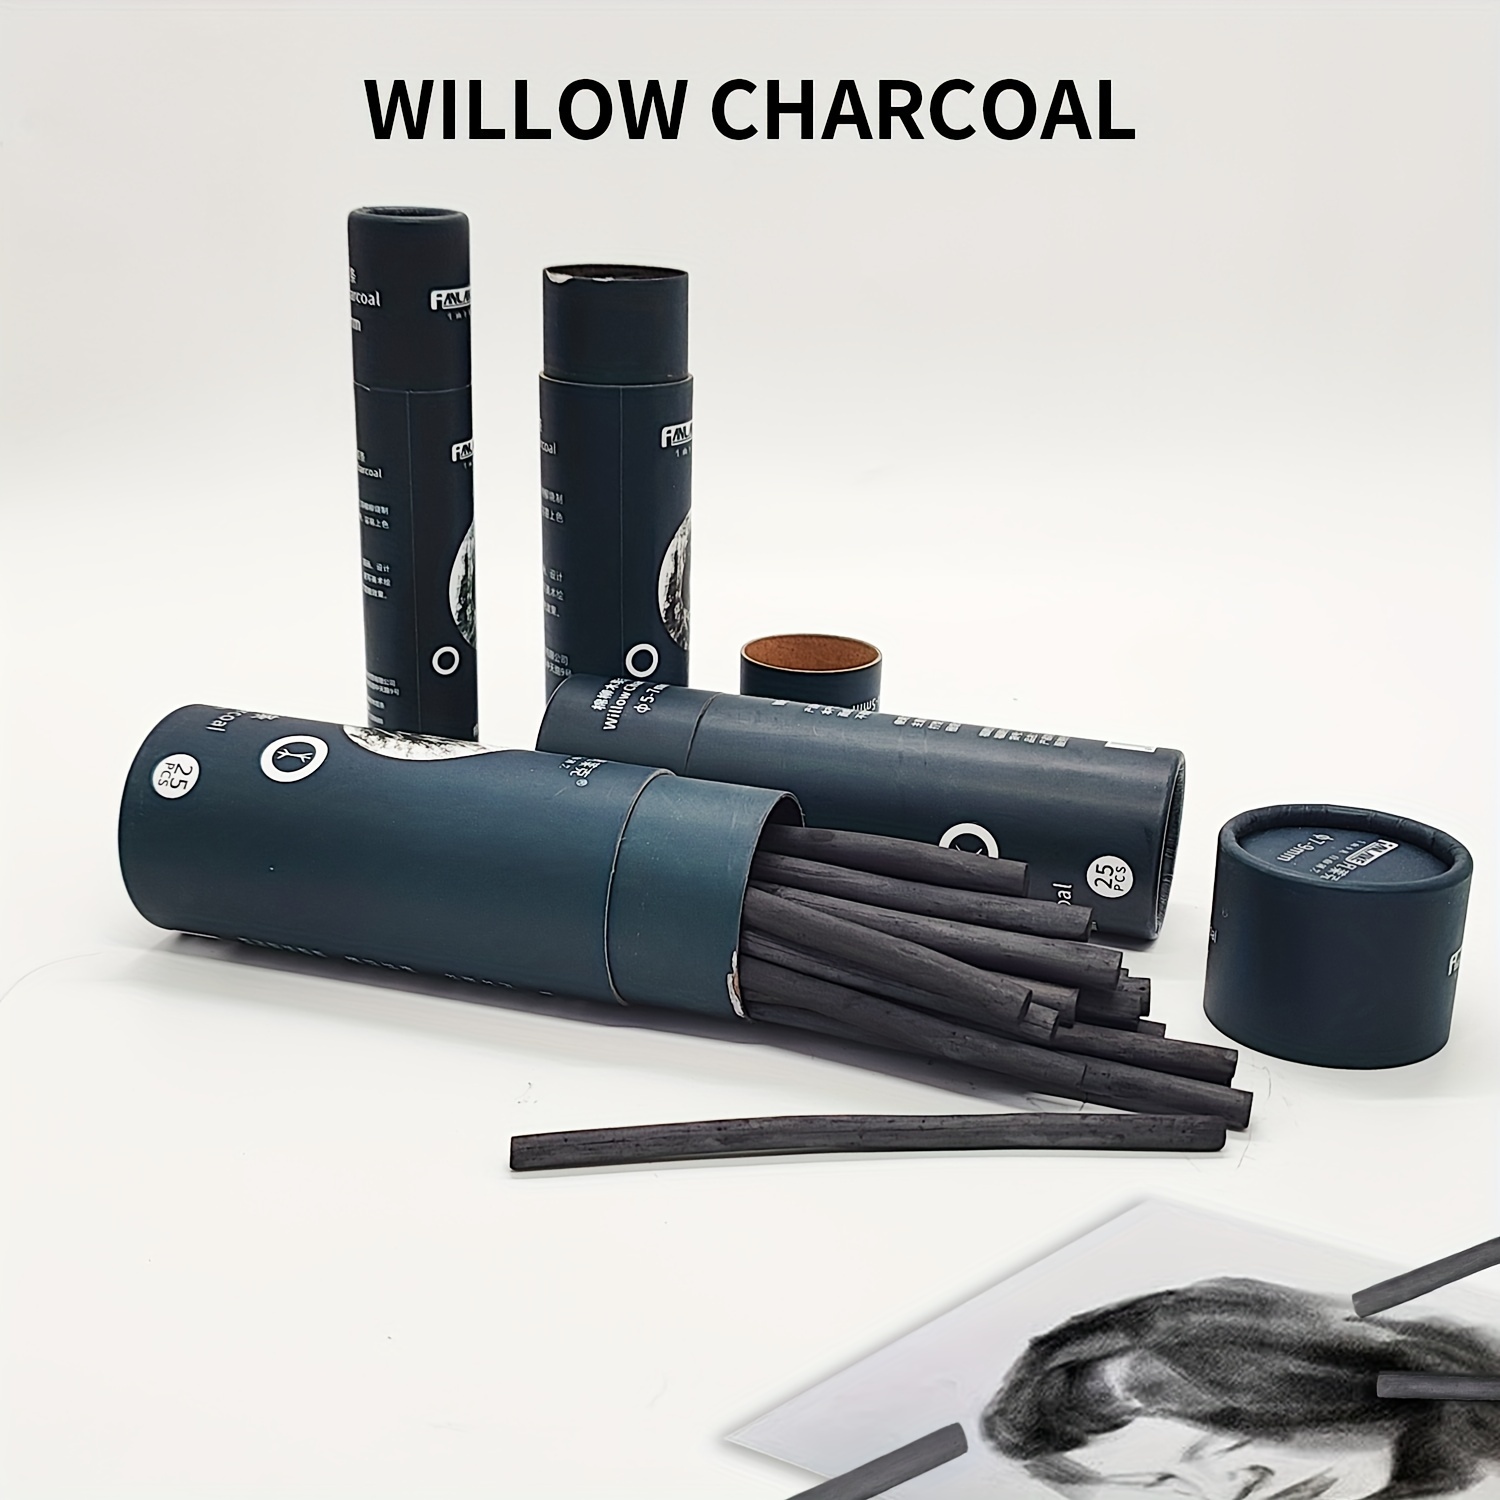 Willow Charcoal Sticks, Natural Willow Charcoal For Artists